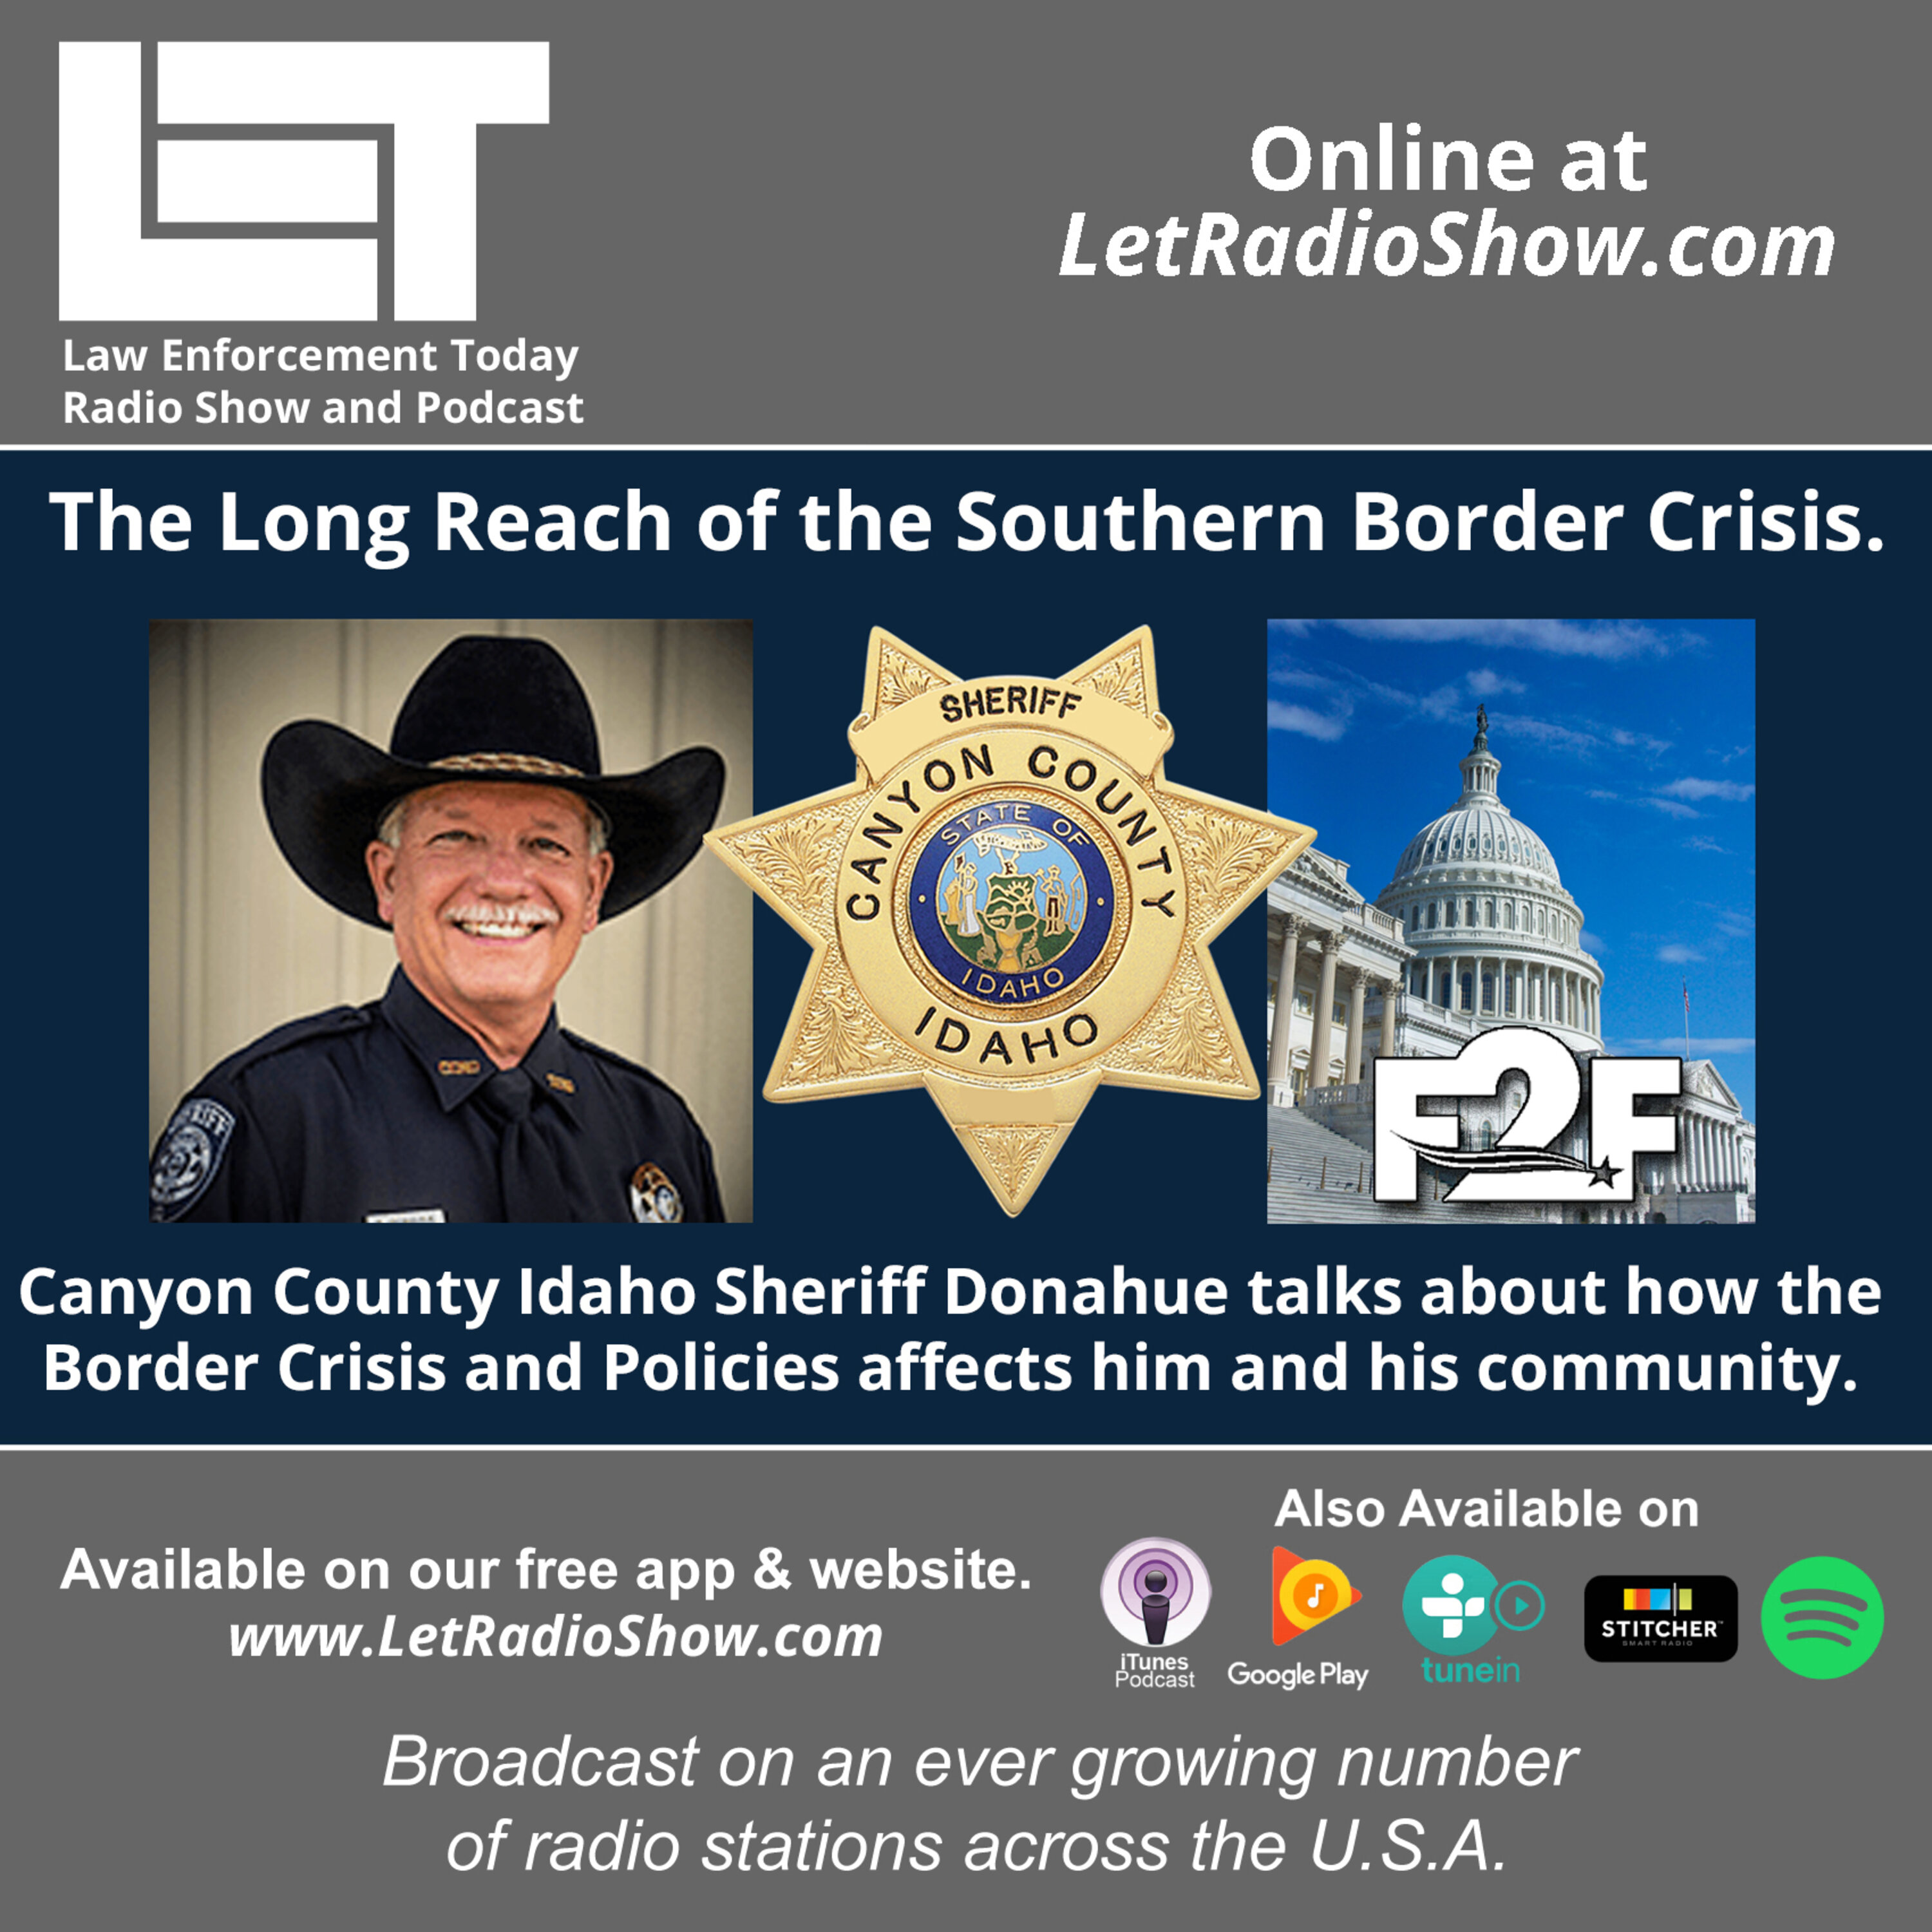 S5E78: Does the Southern Border Crisis Negatively Impact Communities Far Away?